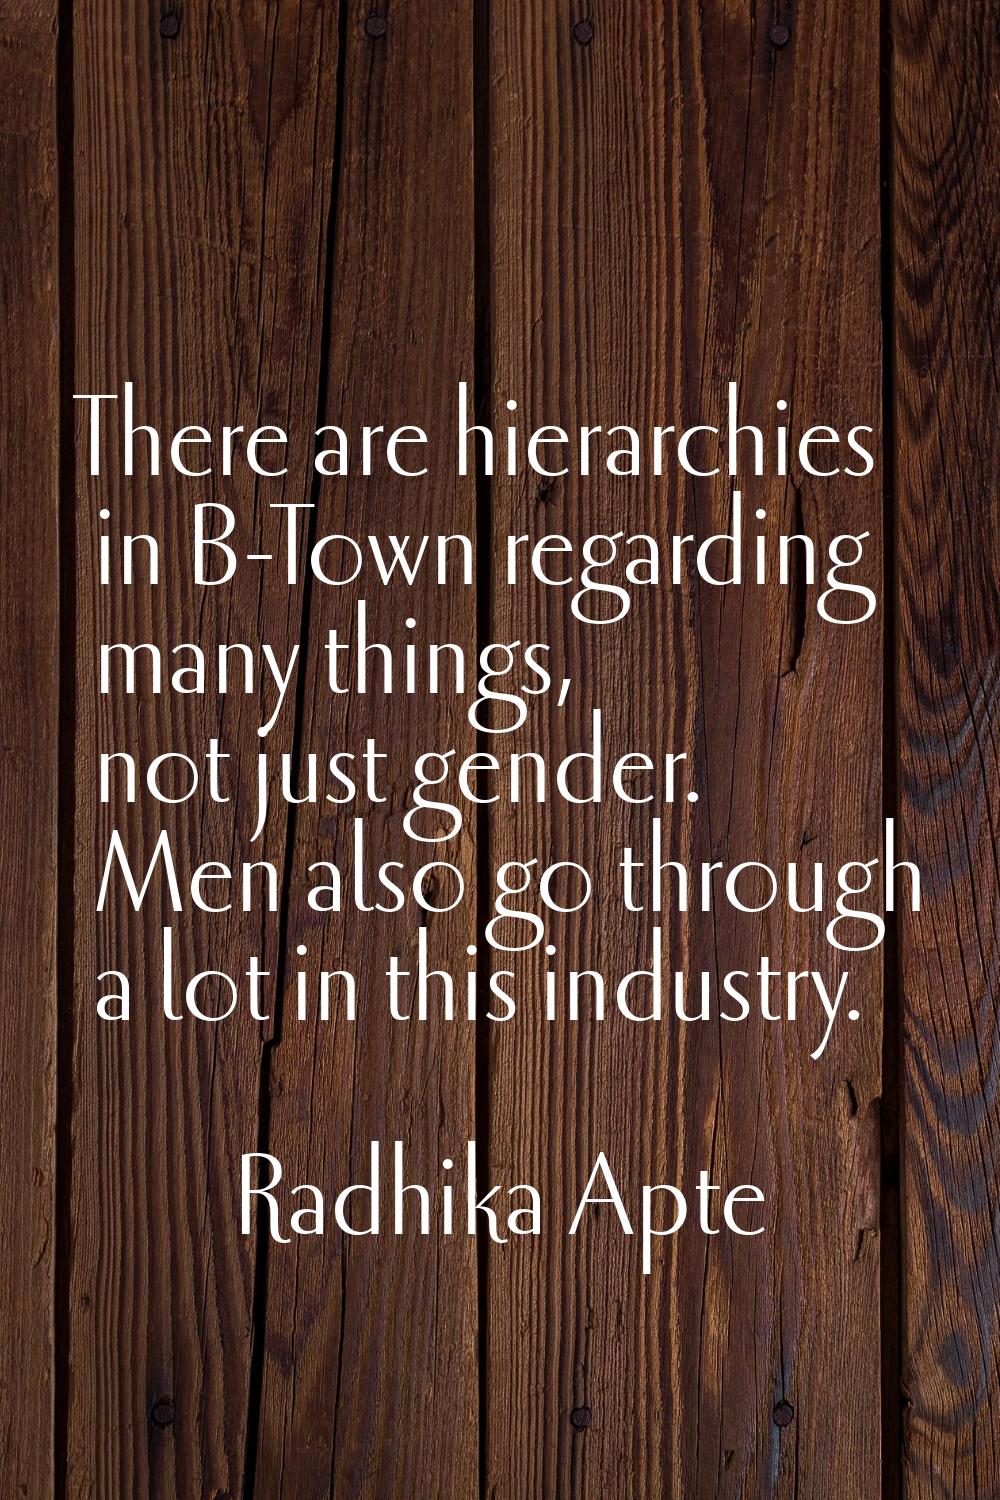 There are hierarchies in B-Town regarding many things, not just gender. Men also go through a lot i